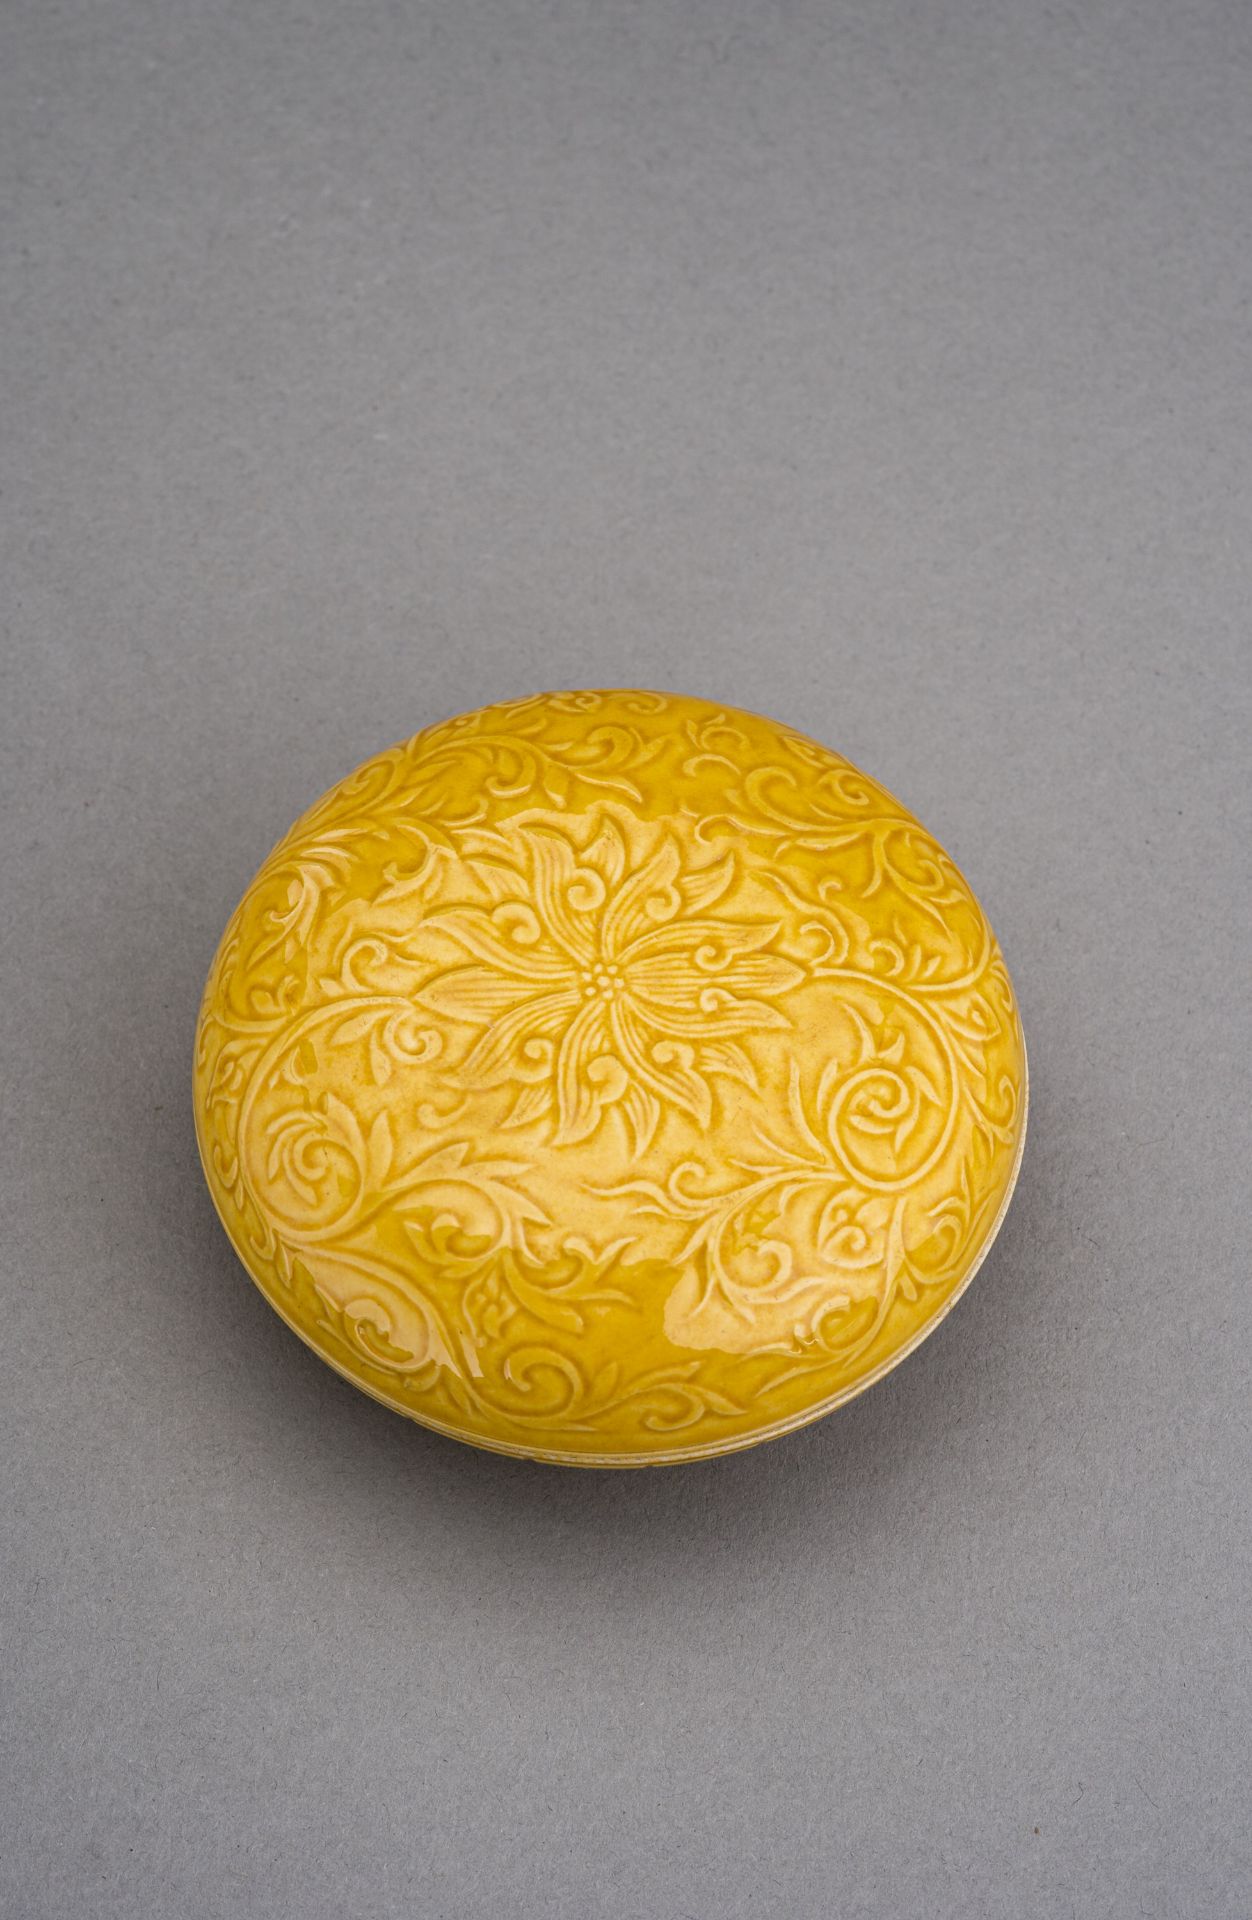 A YELLOW GLAZED PORCELAIN BOX AND COVER, c. 1920s - Image 6 of 9